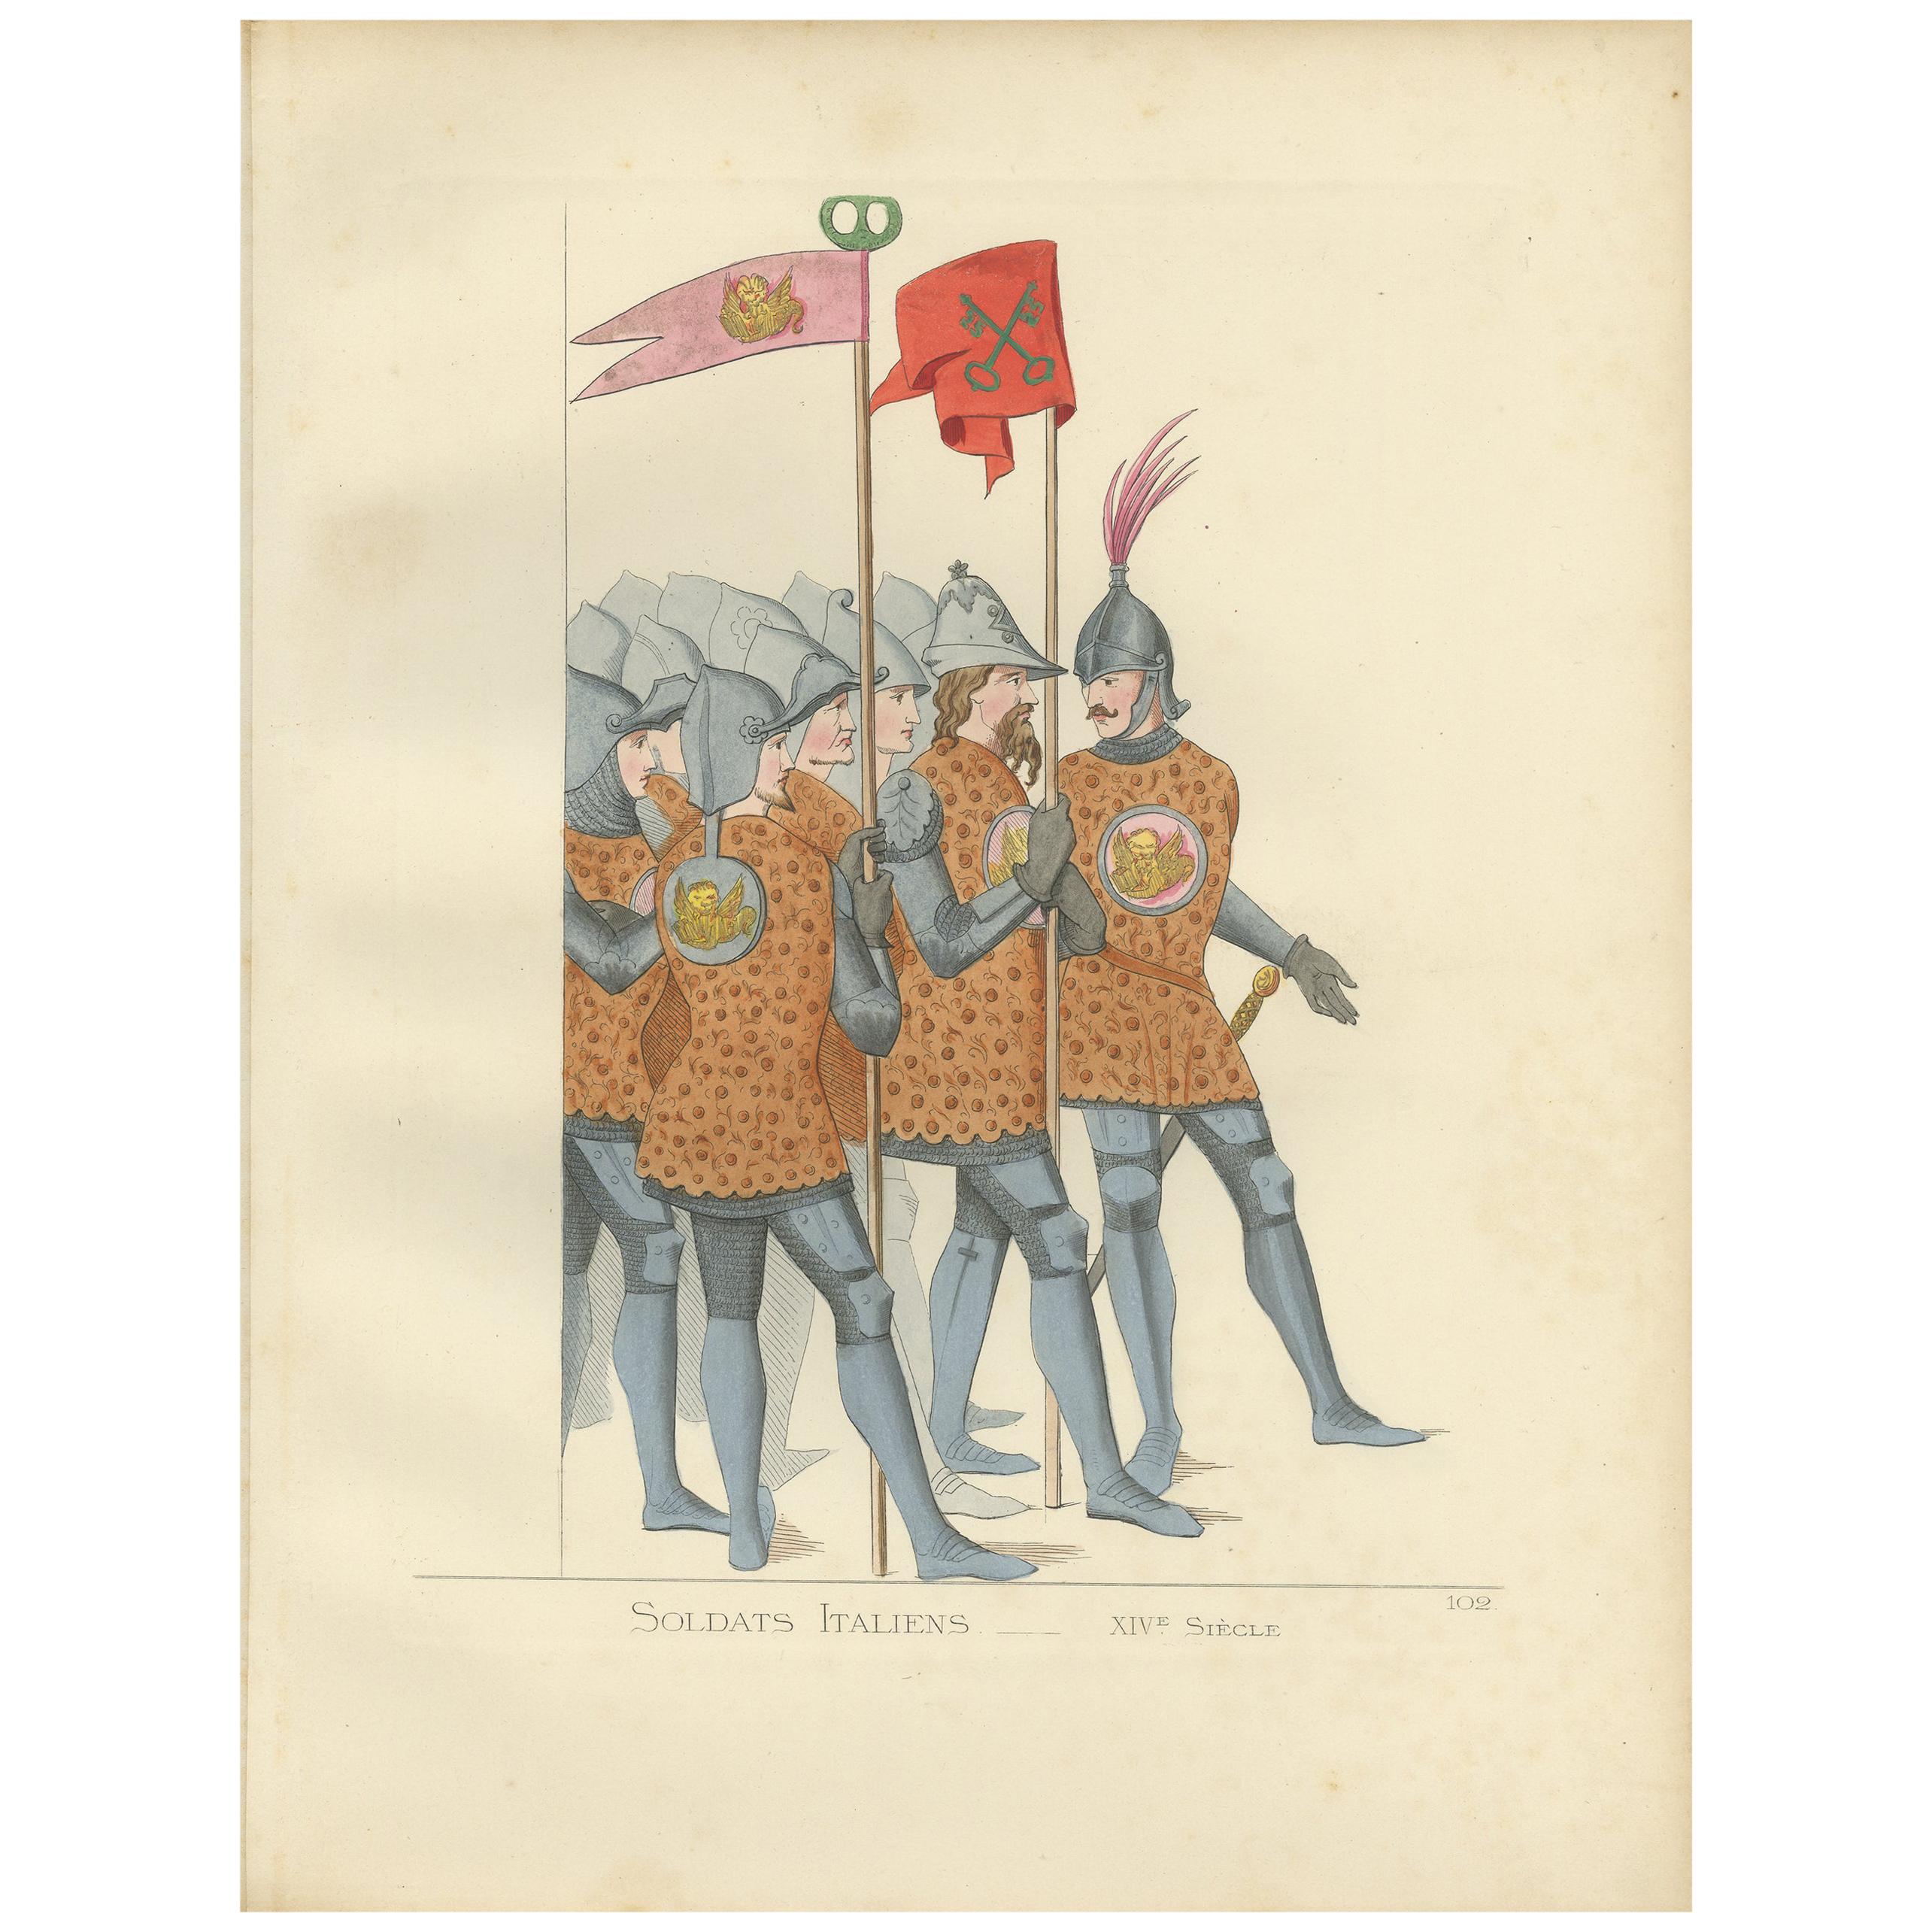 Antique Print of Italian Soldiers, 14th Century, by Bonnard, 1860